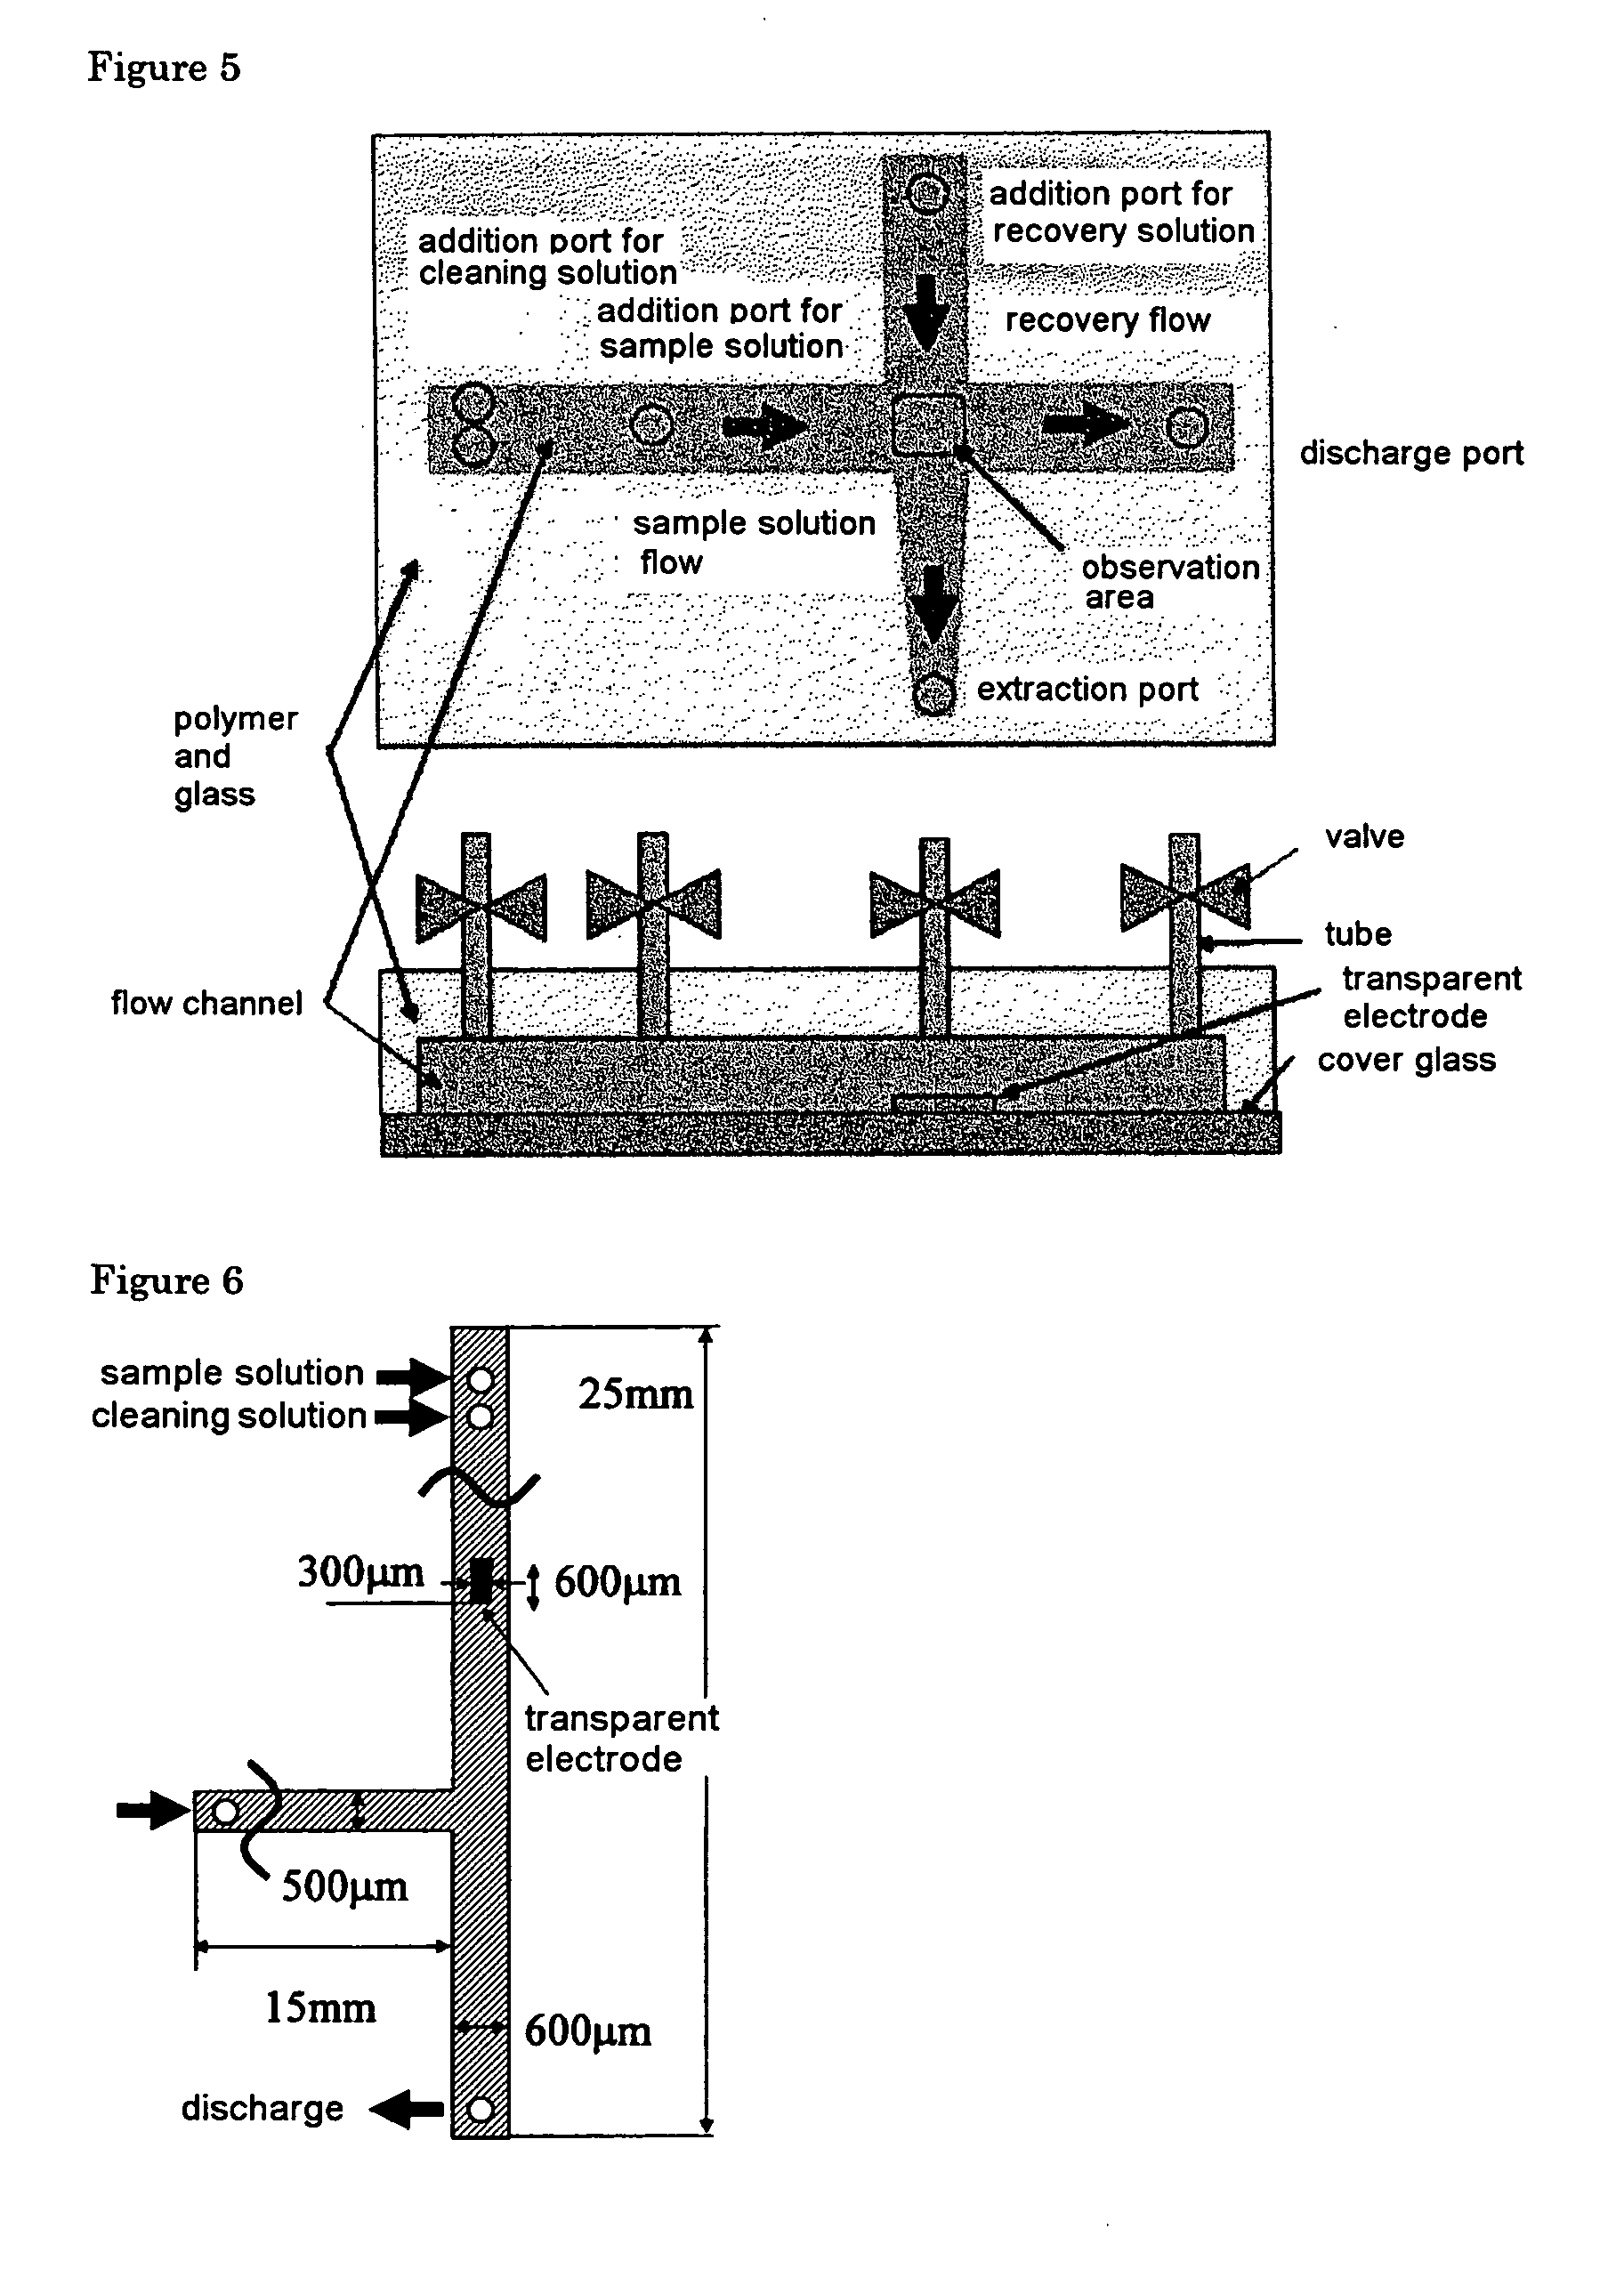 Method of apparatus for collecting micromaterial